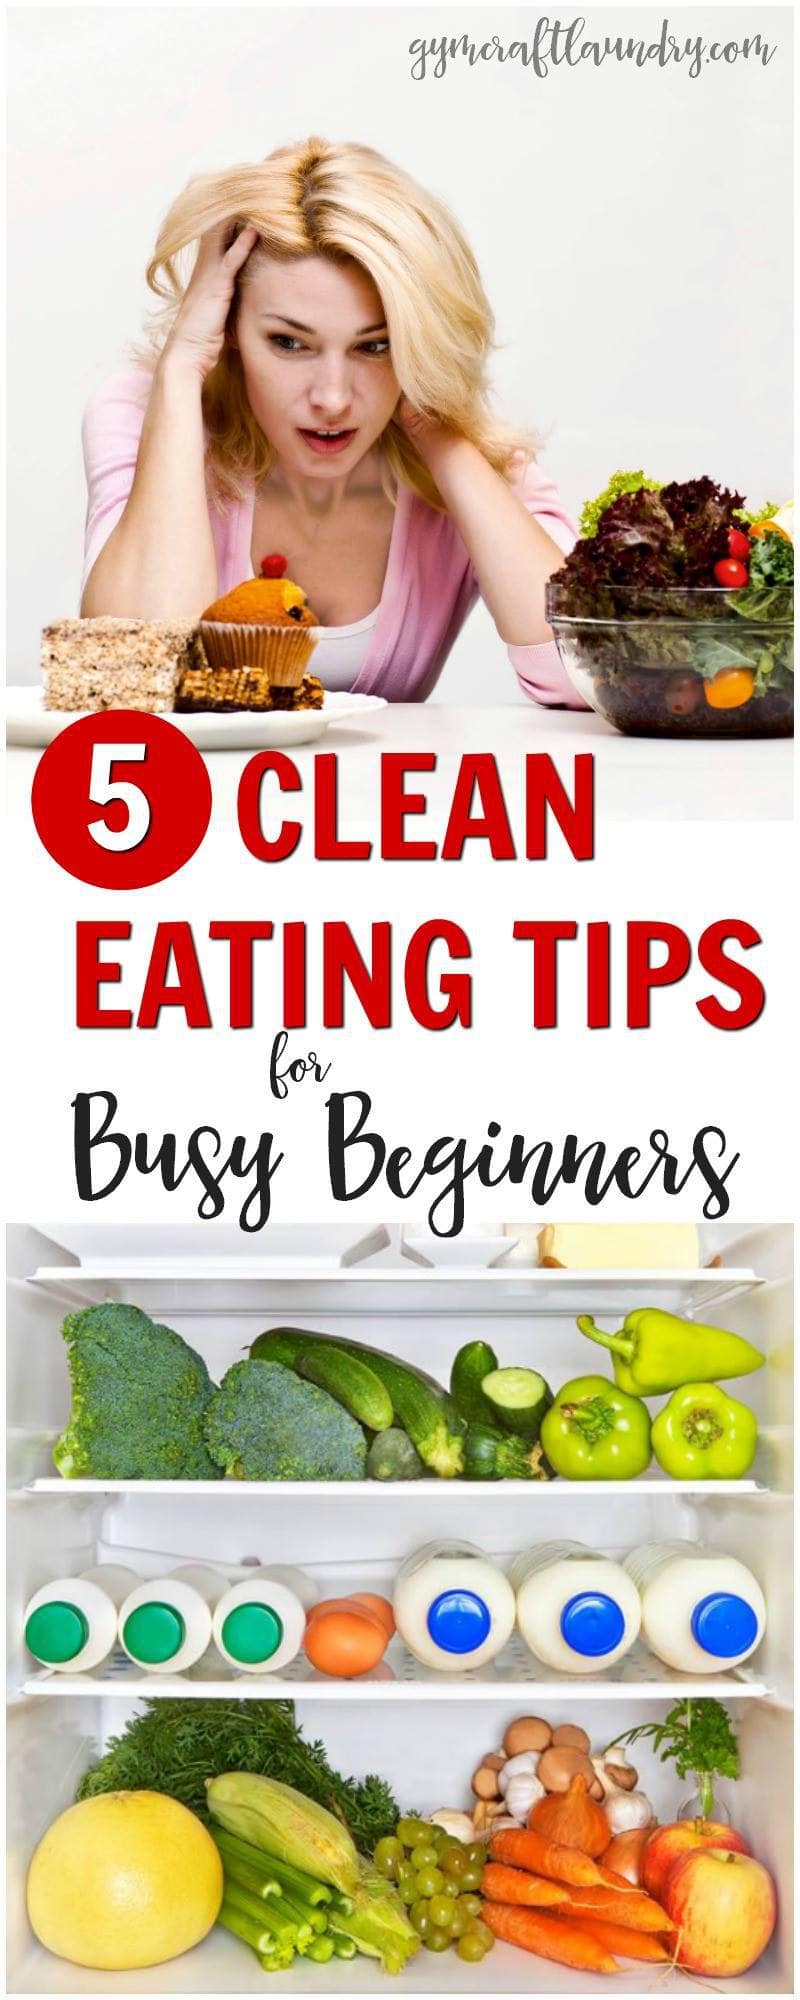 5 clean eating tips for Busy Beginners. How to eat healthy when you don't have time.